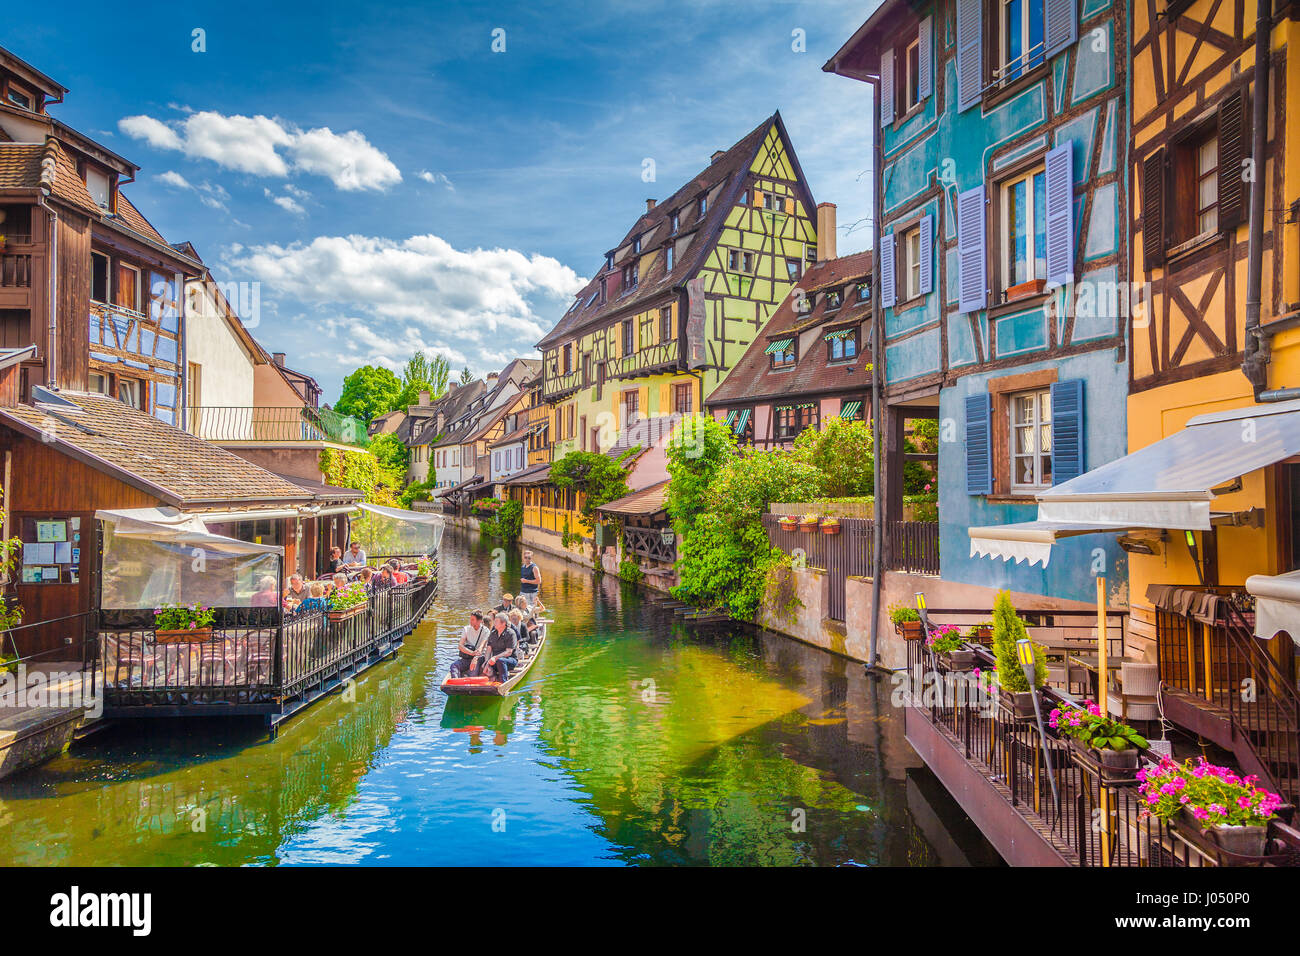 Beautiful view of the historic town of Colmar, also known as Little Venice, with tourists taking a boat ride along colorful houses, Alsace, France Stock Photo